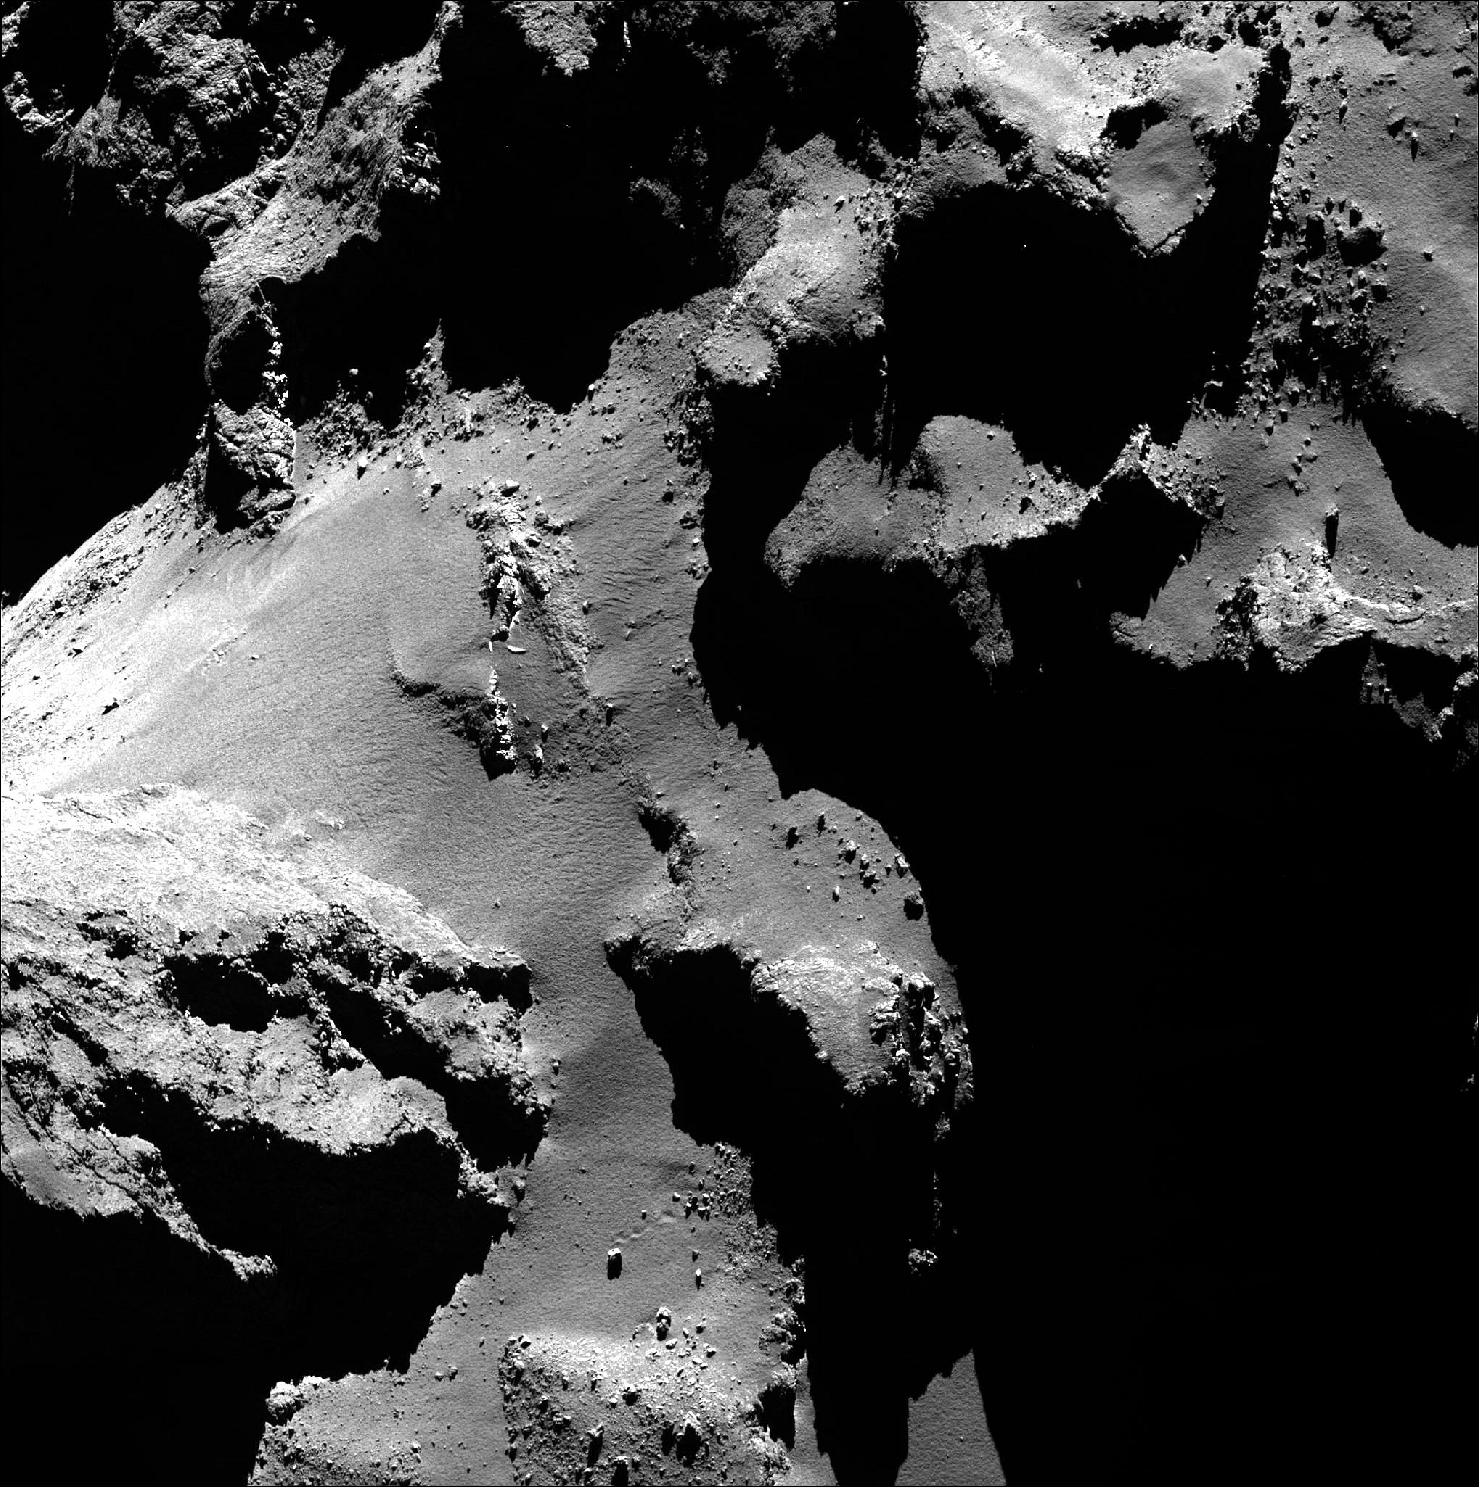 Figure 52: Bouncing boulder on Comet 67P/C-G. An example of a boulder having moved across the surface of Comet 67P/Churyumov-Gerasimenko's surface, captured in Rosetta's OSIRIS imagery. The image was taken with the narrow-angle camera and shows the boulder in the lower third of the image [image credit: ESA/Rosetta/MPS for OSIRIS Team MPS/UPD/LAM/IAA/SSO/INTA/UPM/DASP/IDA (CC BY-SA 4.0)]